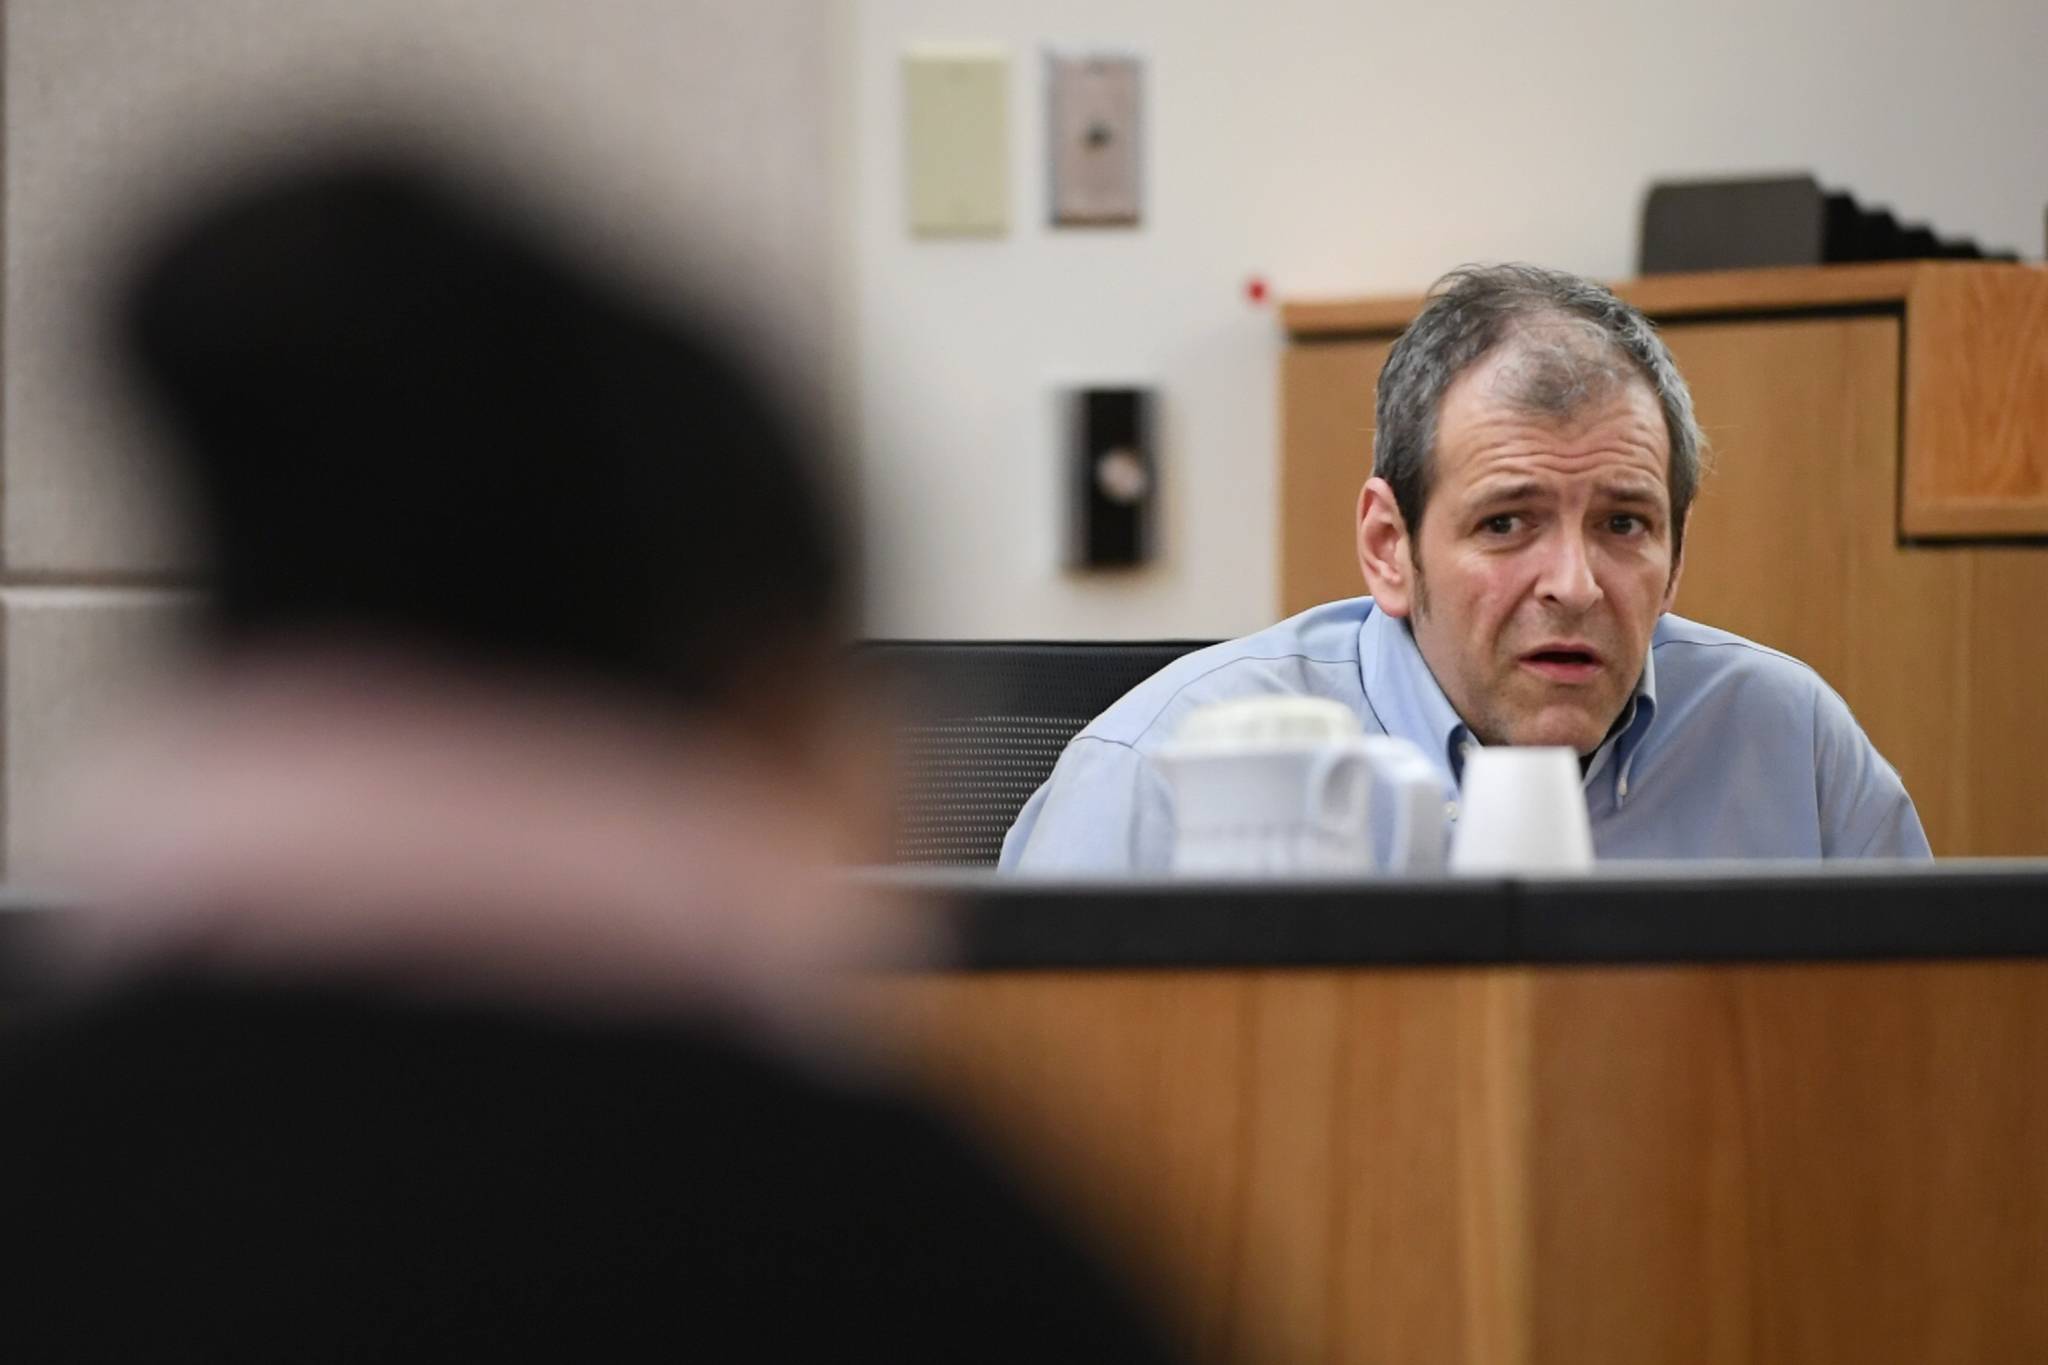 James Barrett is questioned by Defense Attorney Natasha Norris in Juneau Superior Court on Wednesday, Sept. 4, 2019, during the trial of Laron Carlton Graham on two counts of first-degree murder for the November 2015 shooting deaths of 36-year-old Robert H. Meireis and 34-year-old Elizabeth K. Tonsmeire. (Michael Penn | Juneau Empire)